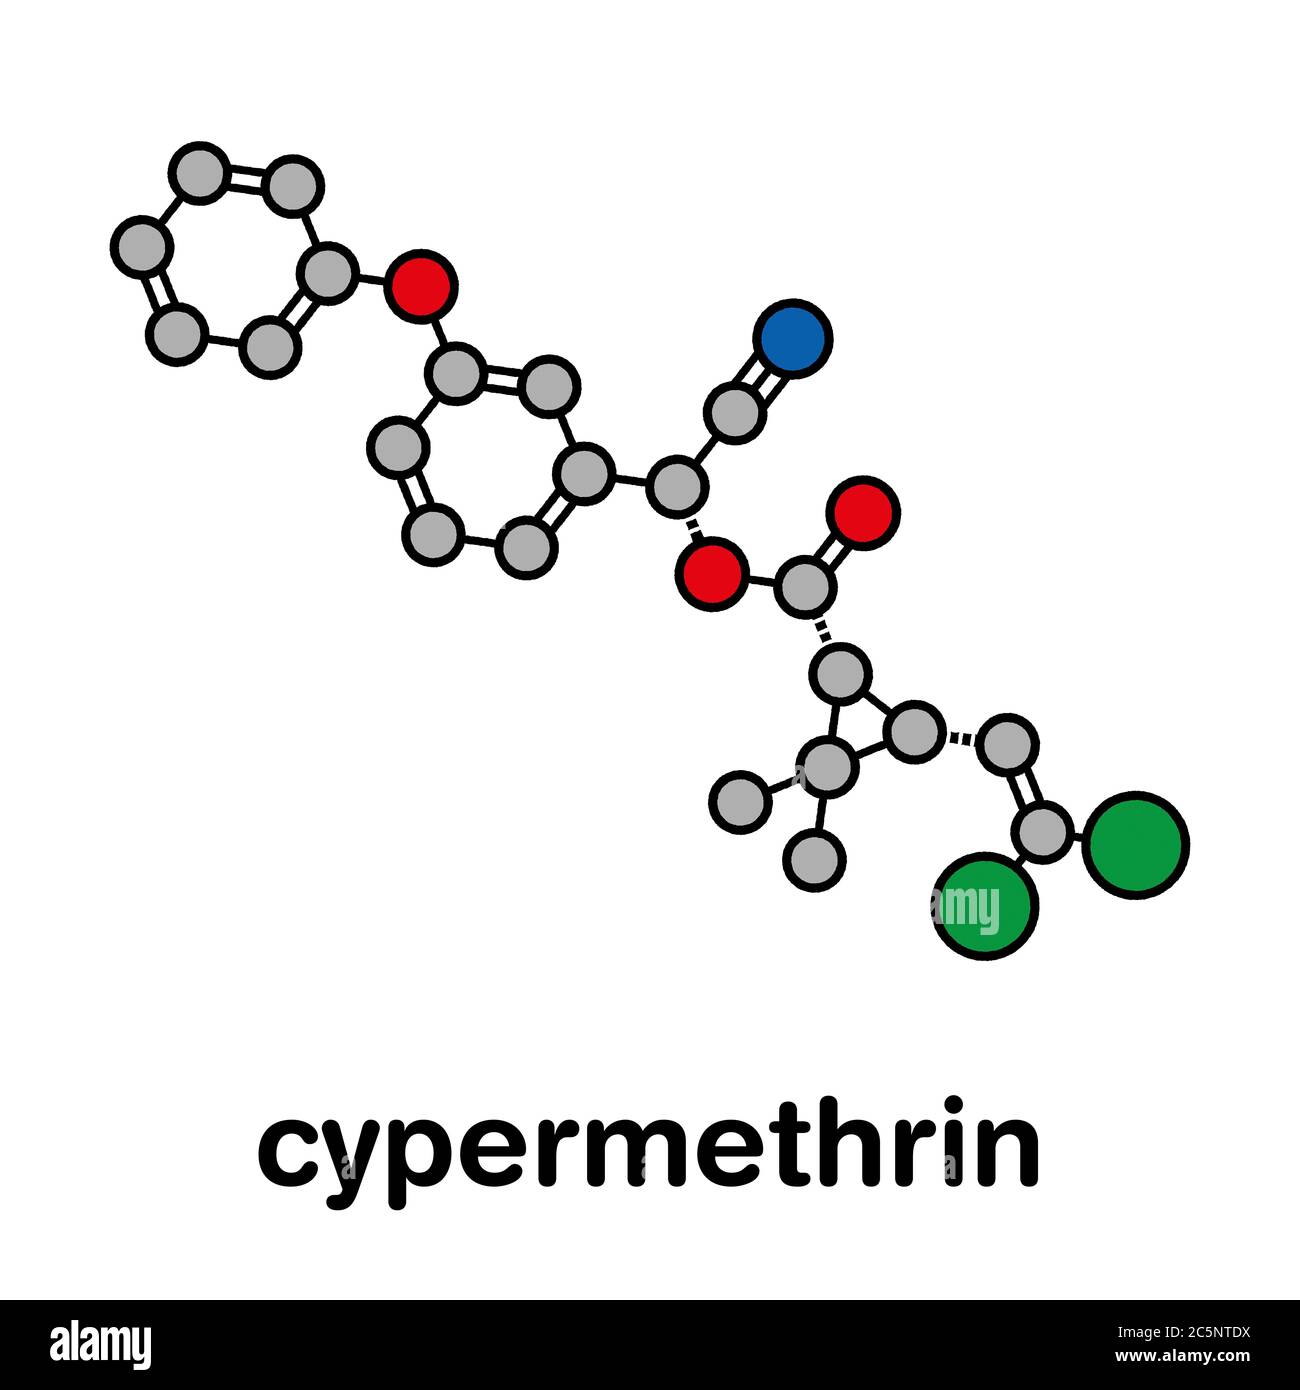 Cypermethrin insecticide molecule. Stylized skeletal formula (chemical structure): Atoms are shown as color-coded circles: hydrogen (hidden), carbon (grey), oxygen (red), nitrogen (blue), chlorine (green). Stock Photo